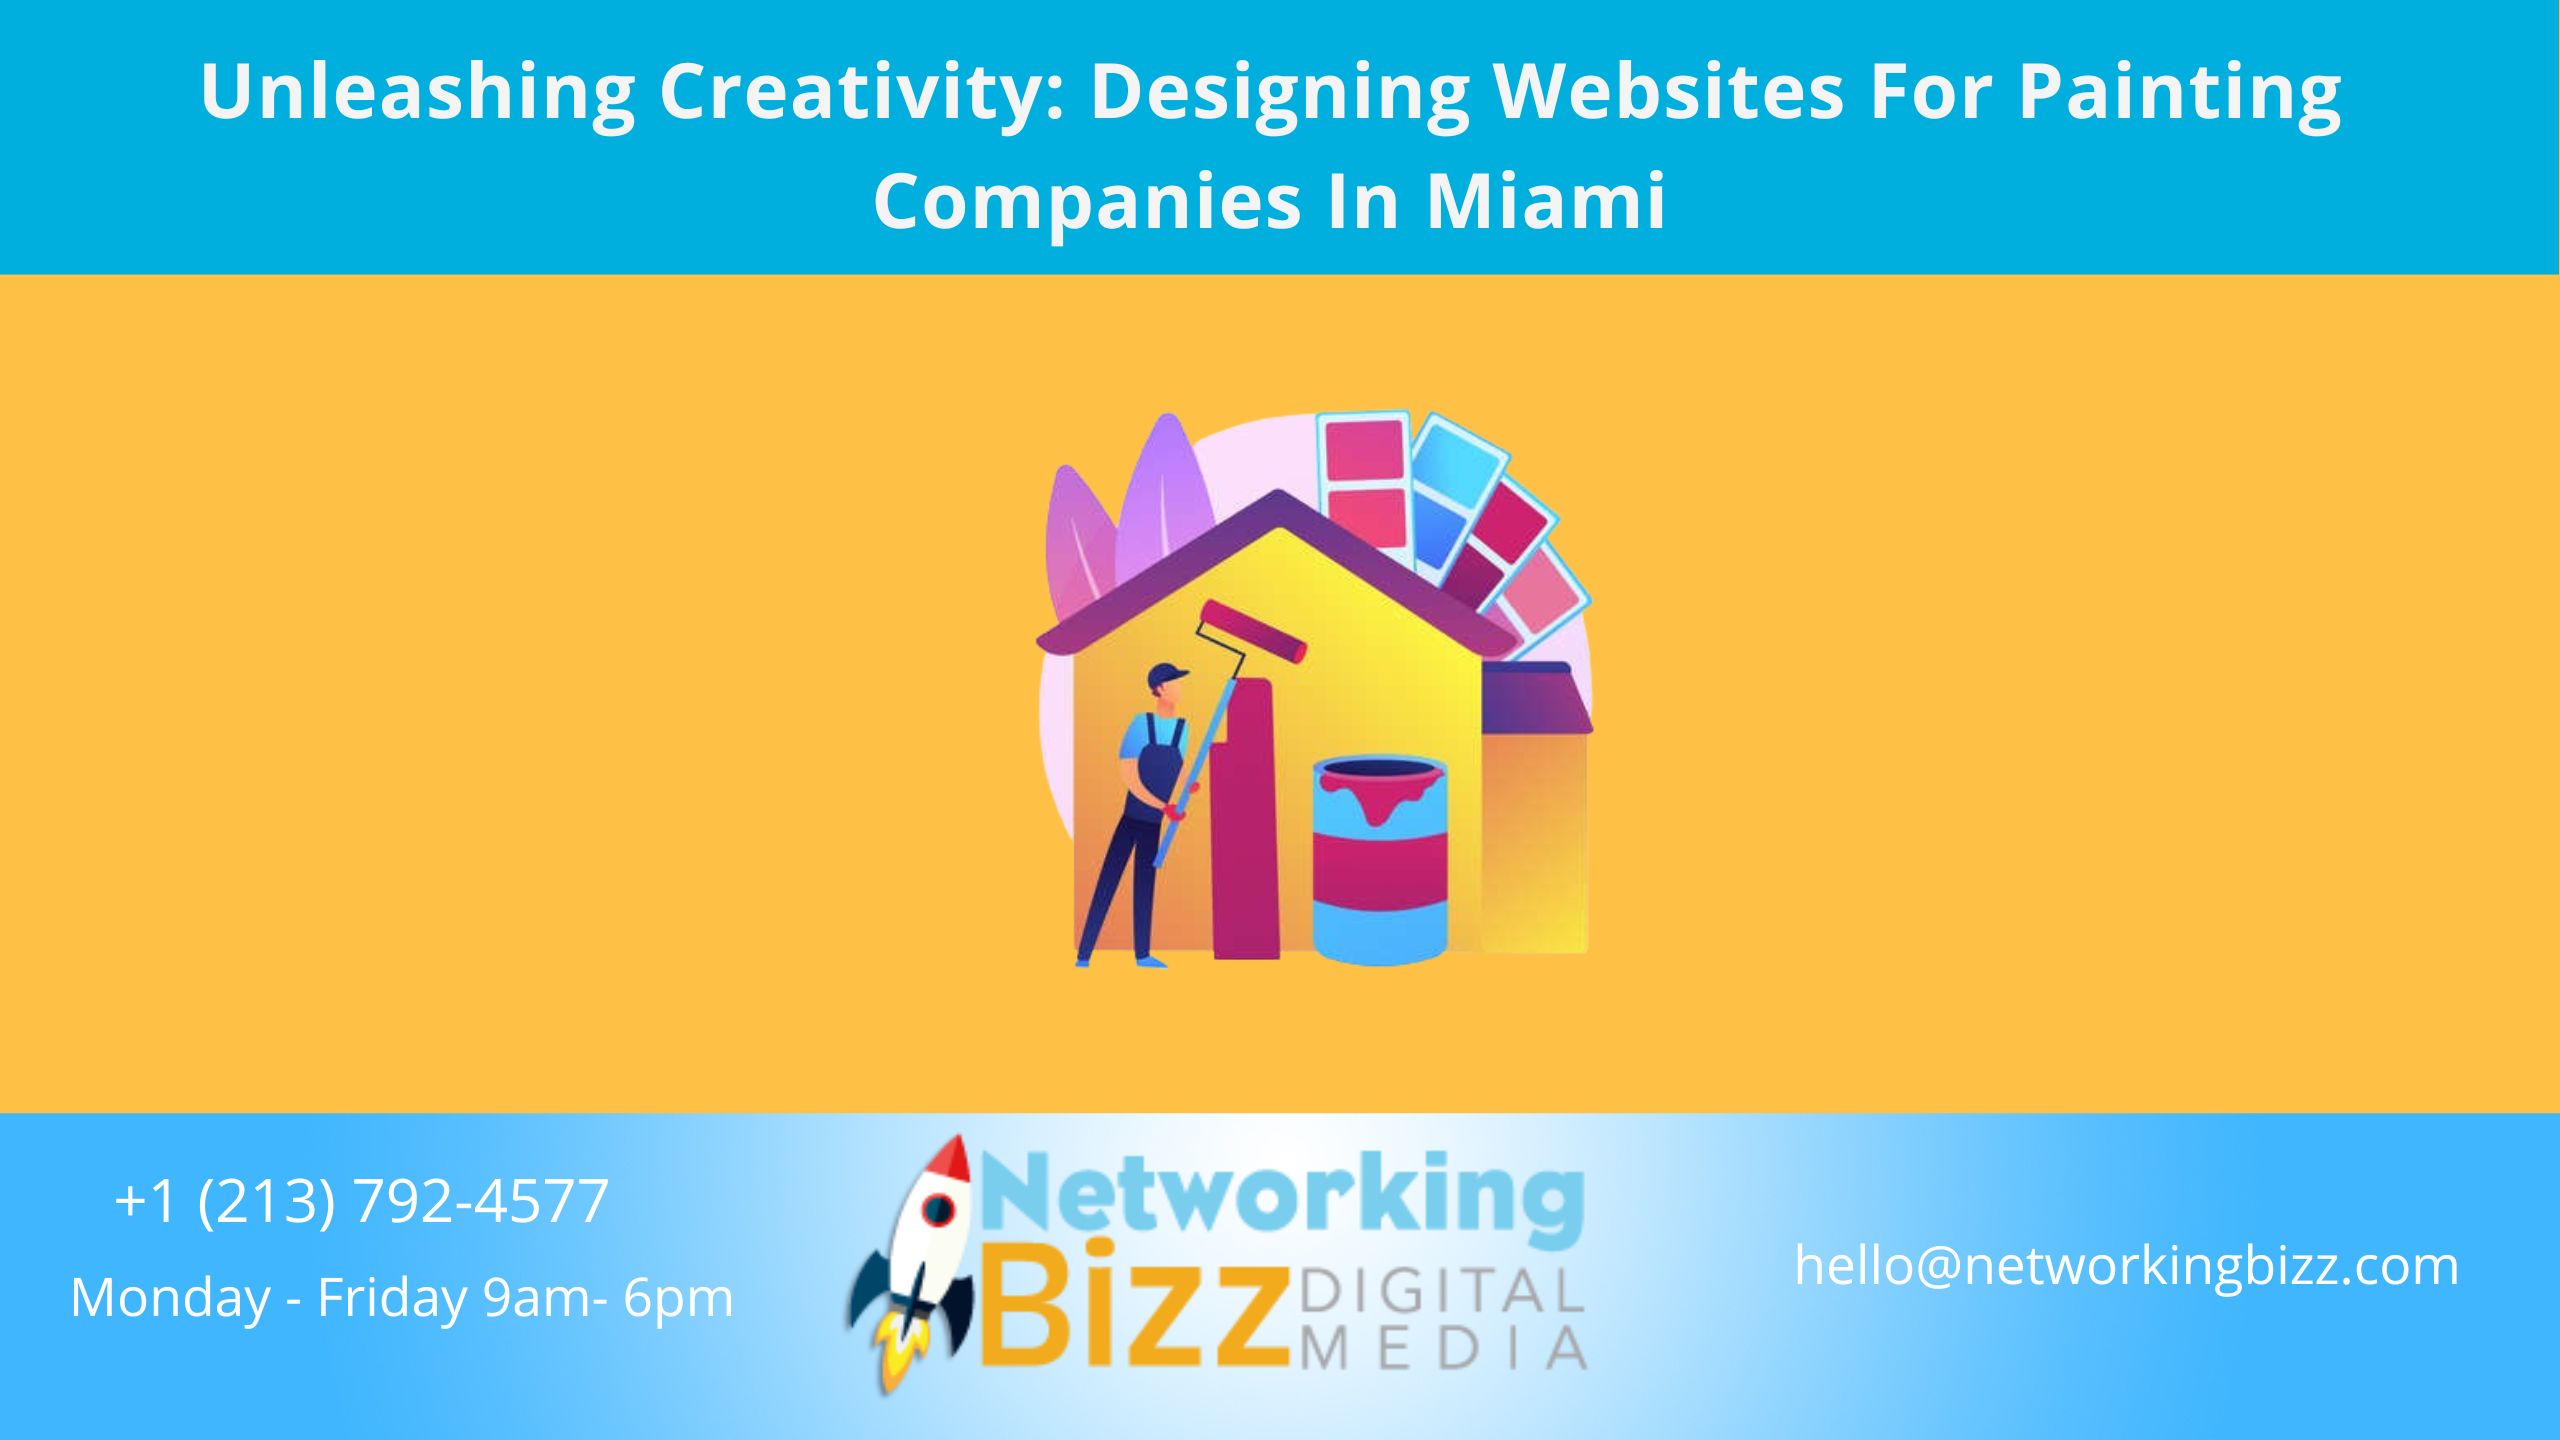 Unleashing Creativity: Designing Websites For Painting Companies In Miami